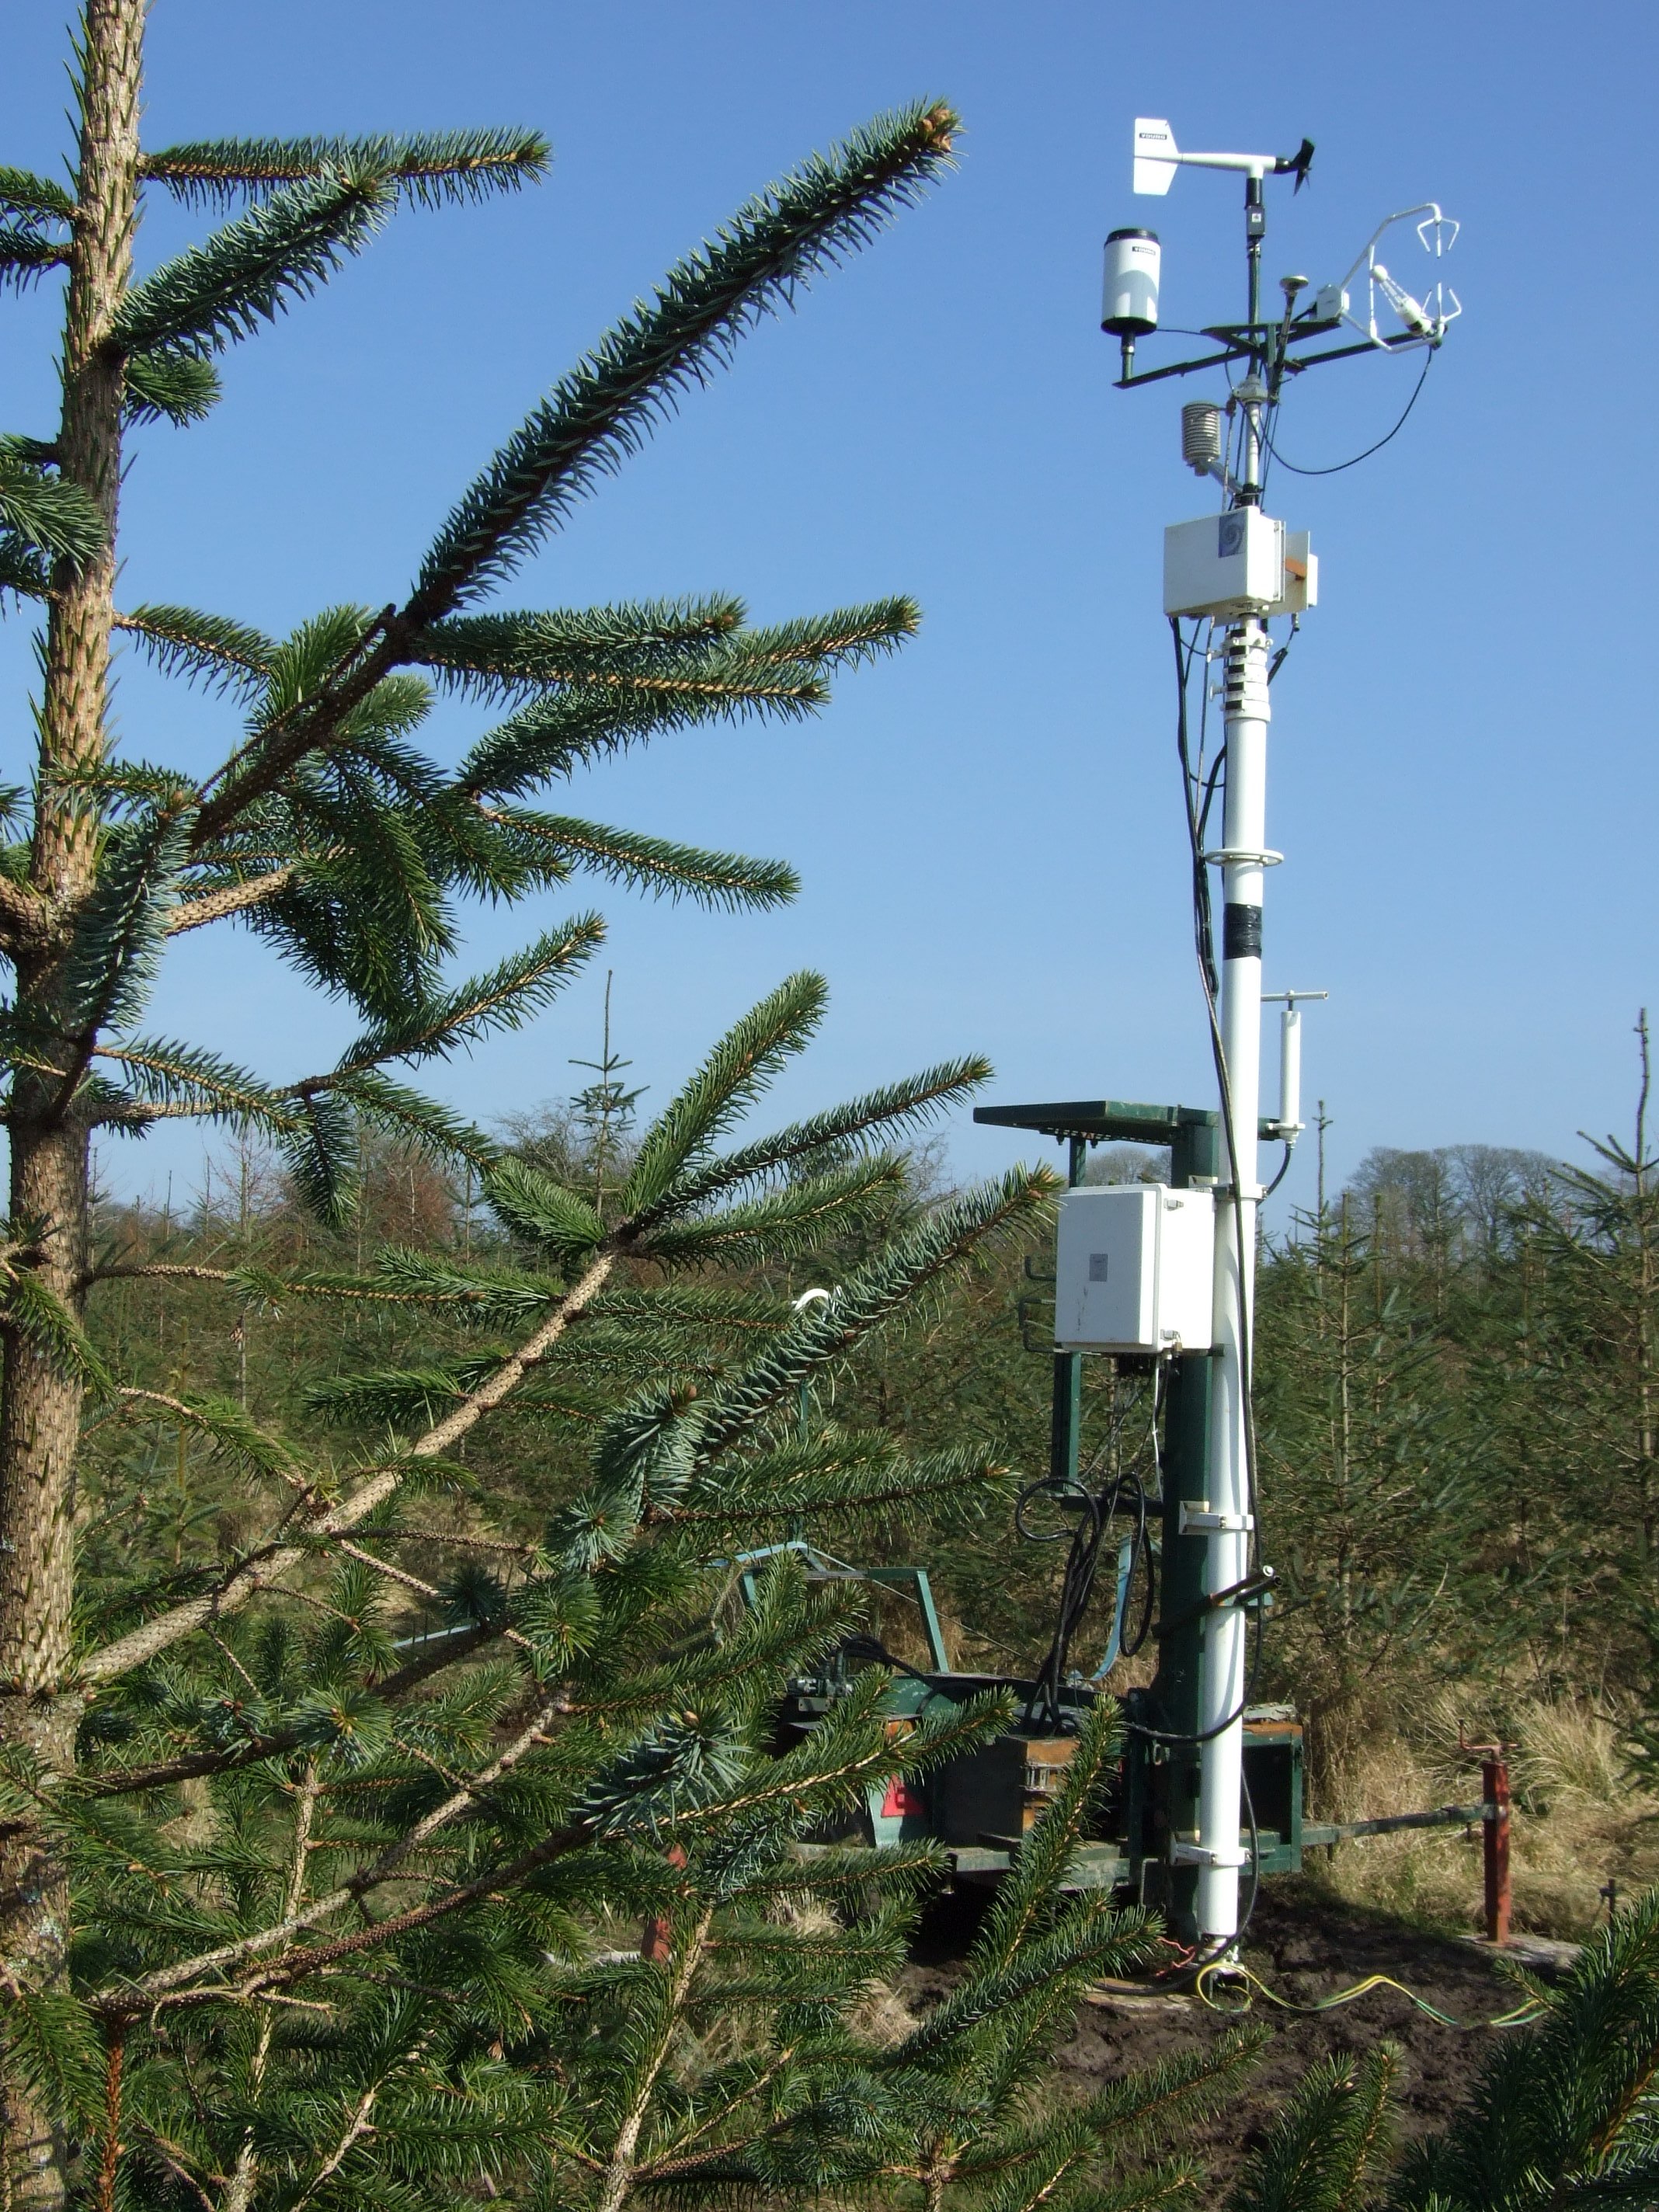 Sensor height is 4m above ground level when the mast is erect, but not extended.